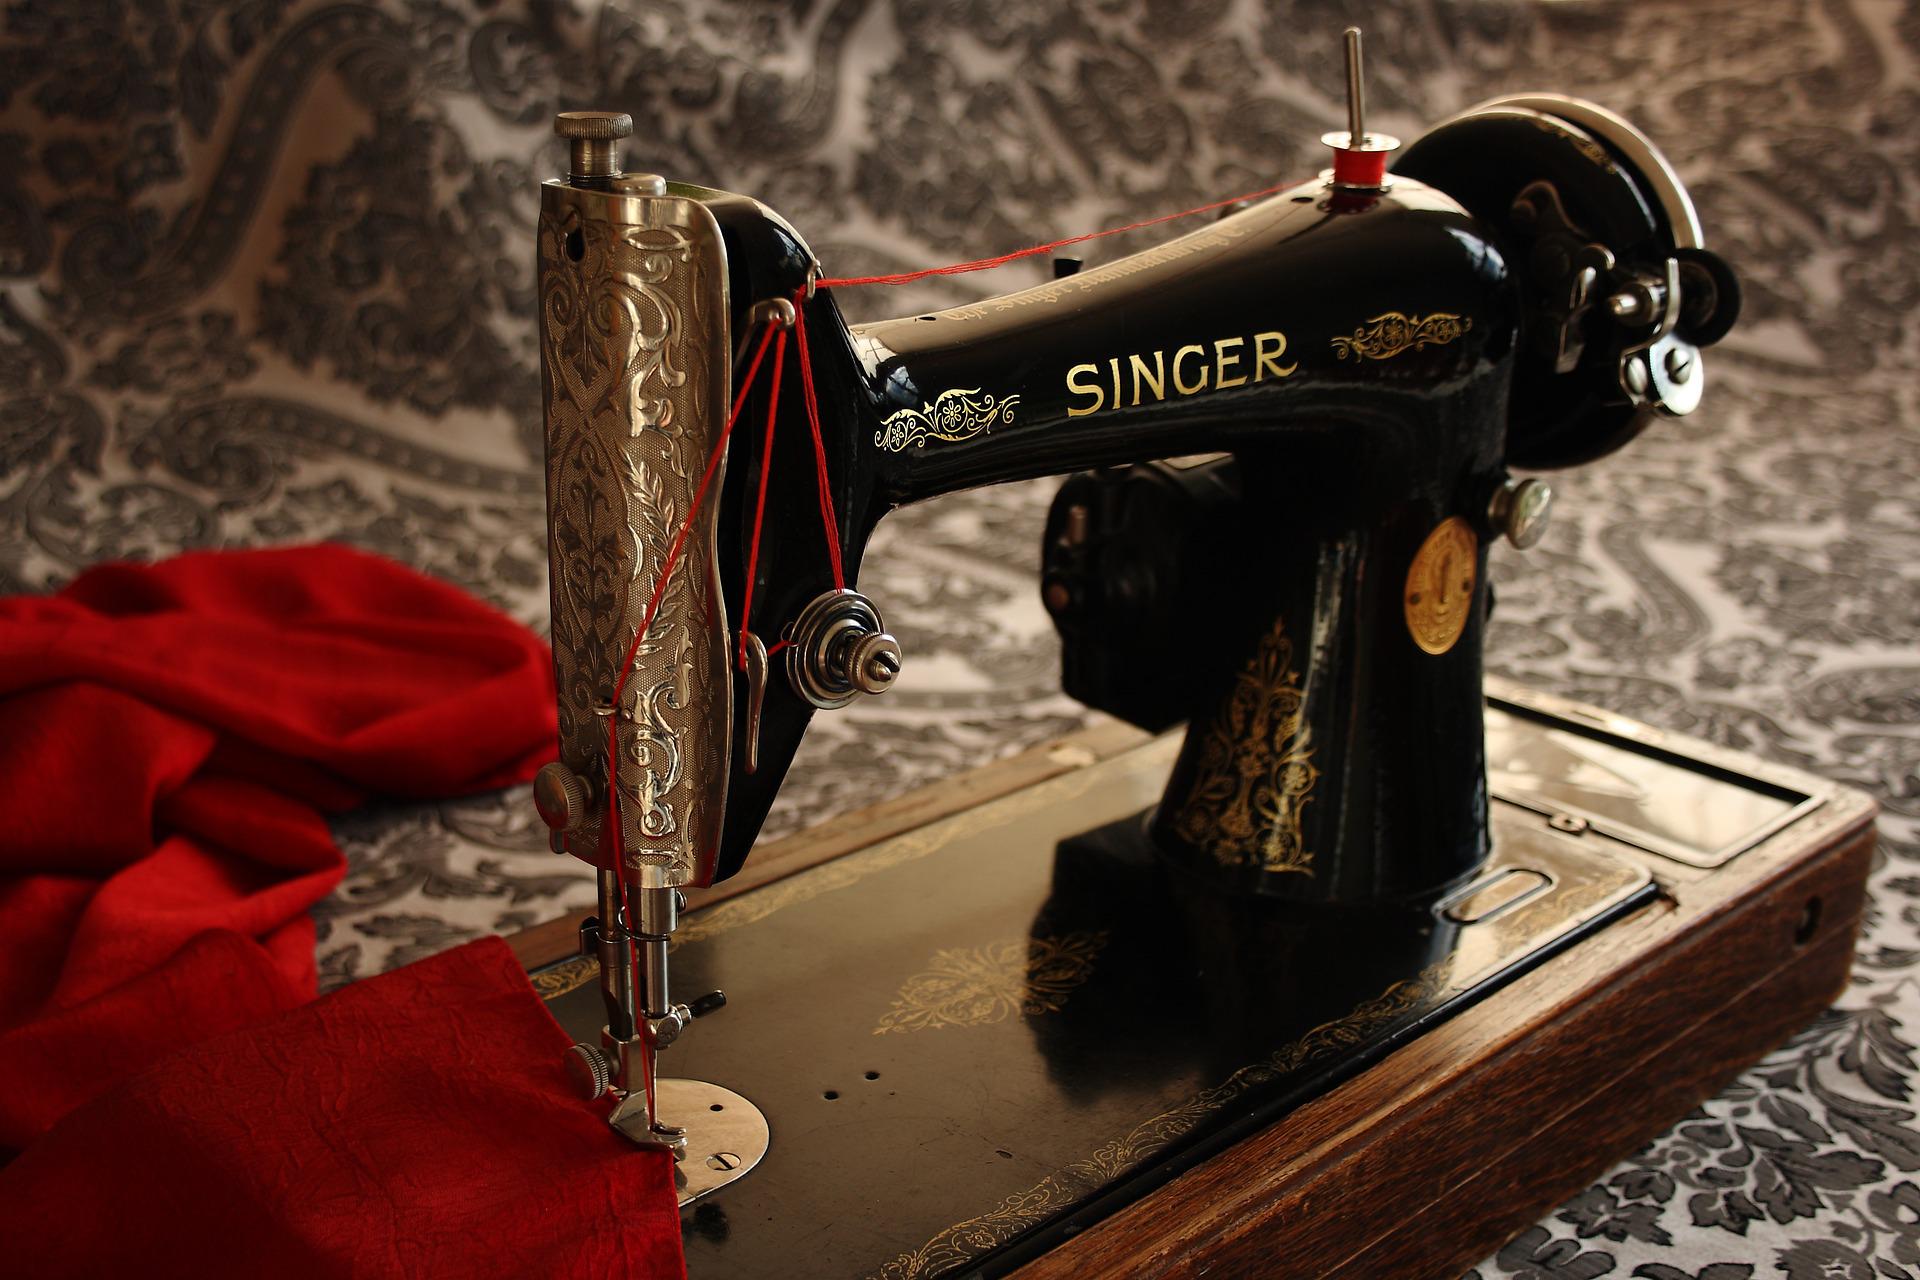 Black Singer machine on paisley background. Image by Steen Jepsen from Pixabay 